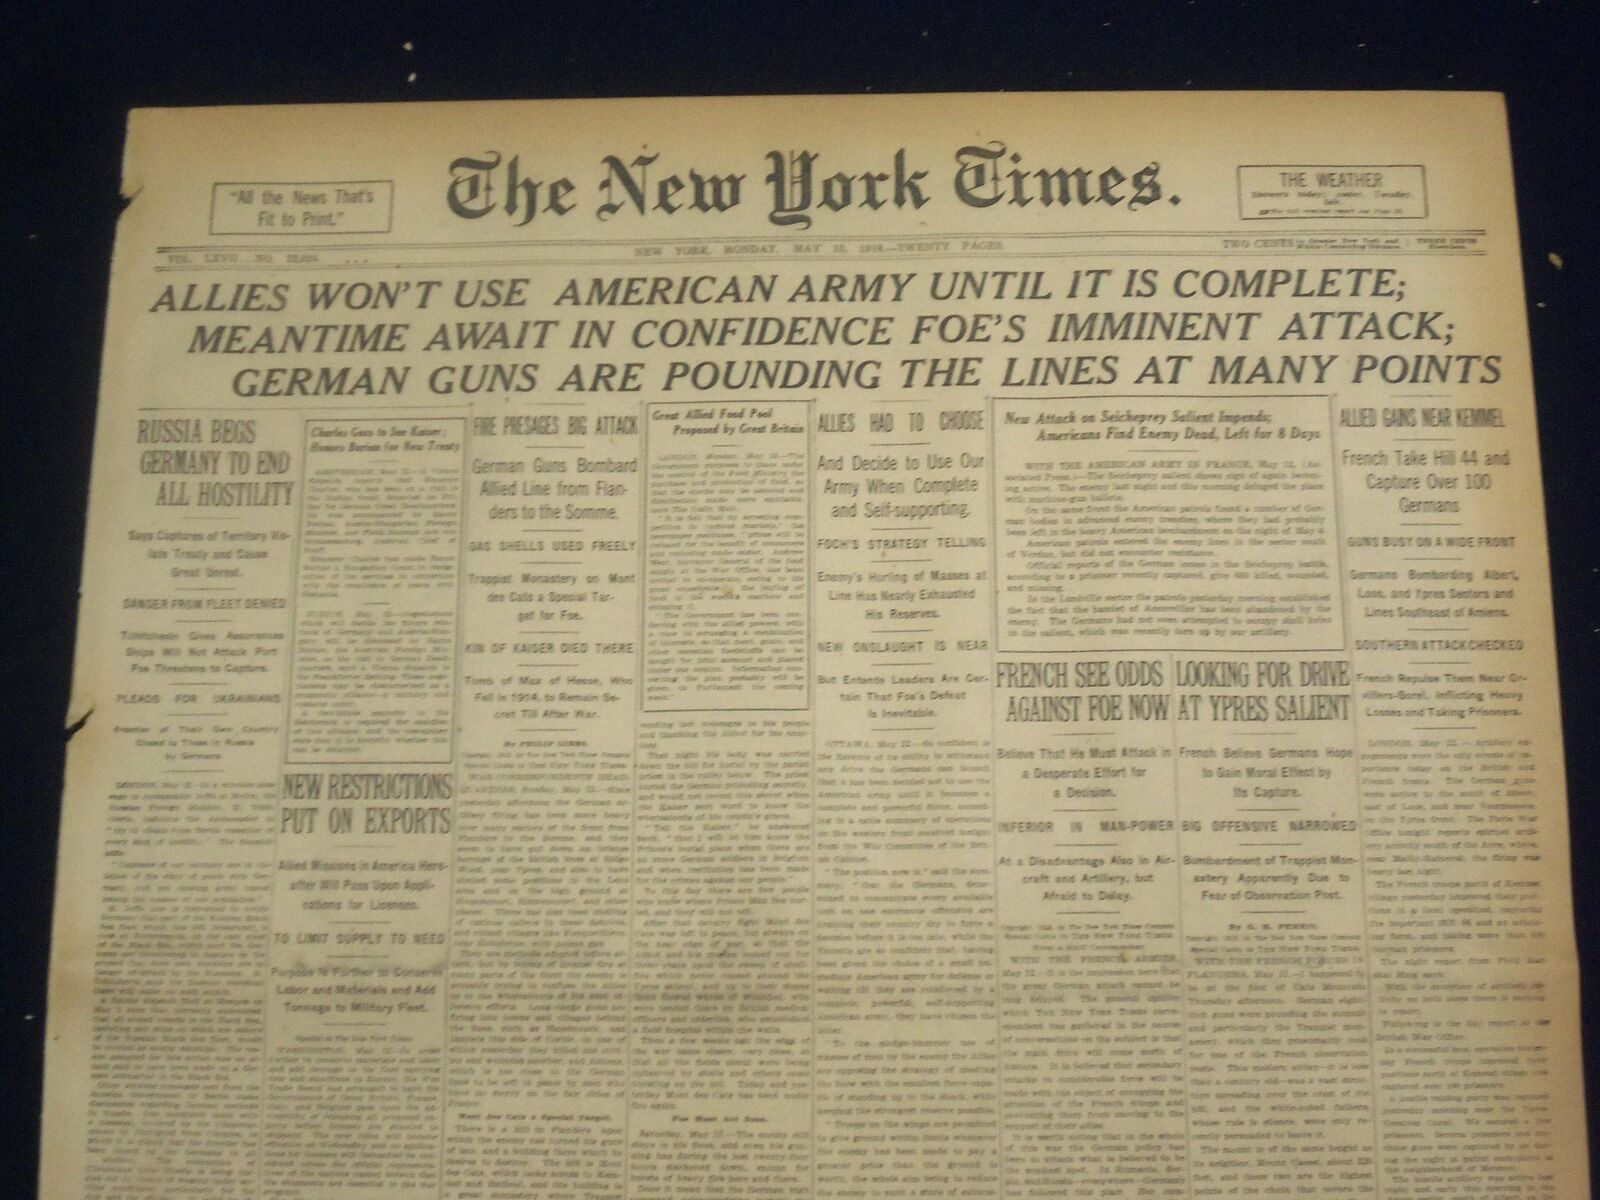 1918 MAY 13 NEW YORK TIMES-ALLIES WON'T USE AMERICAN ARMY UNTIL COMPLETE-NT 8180